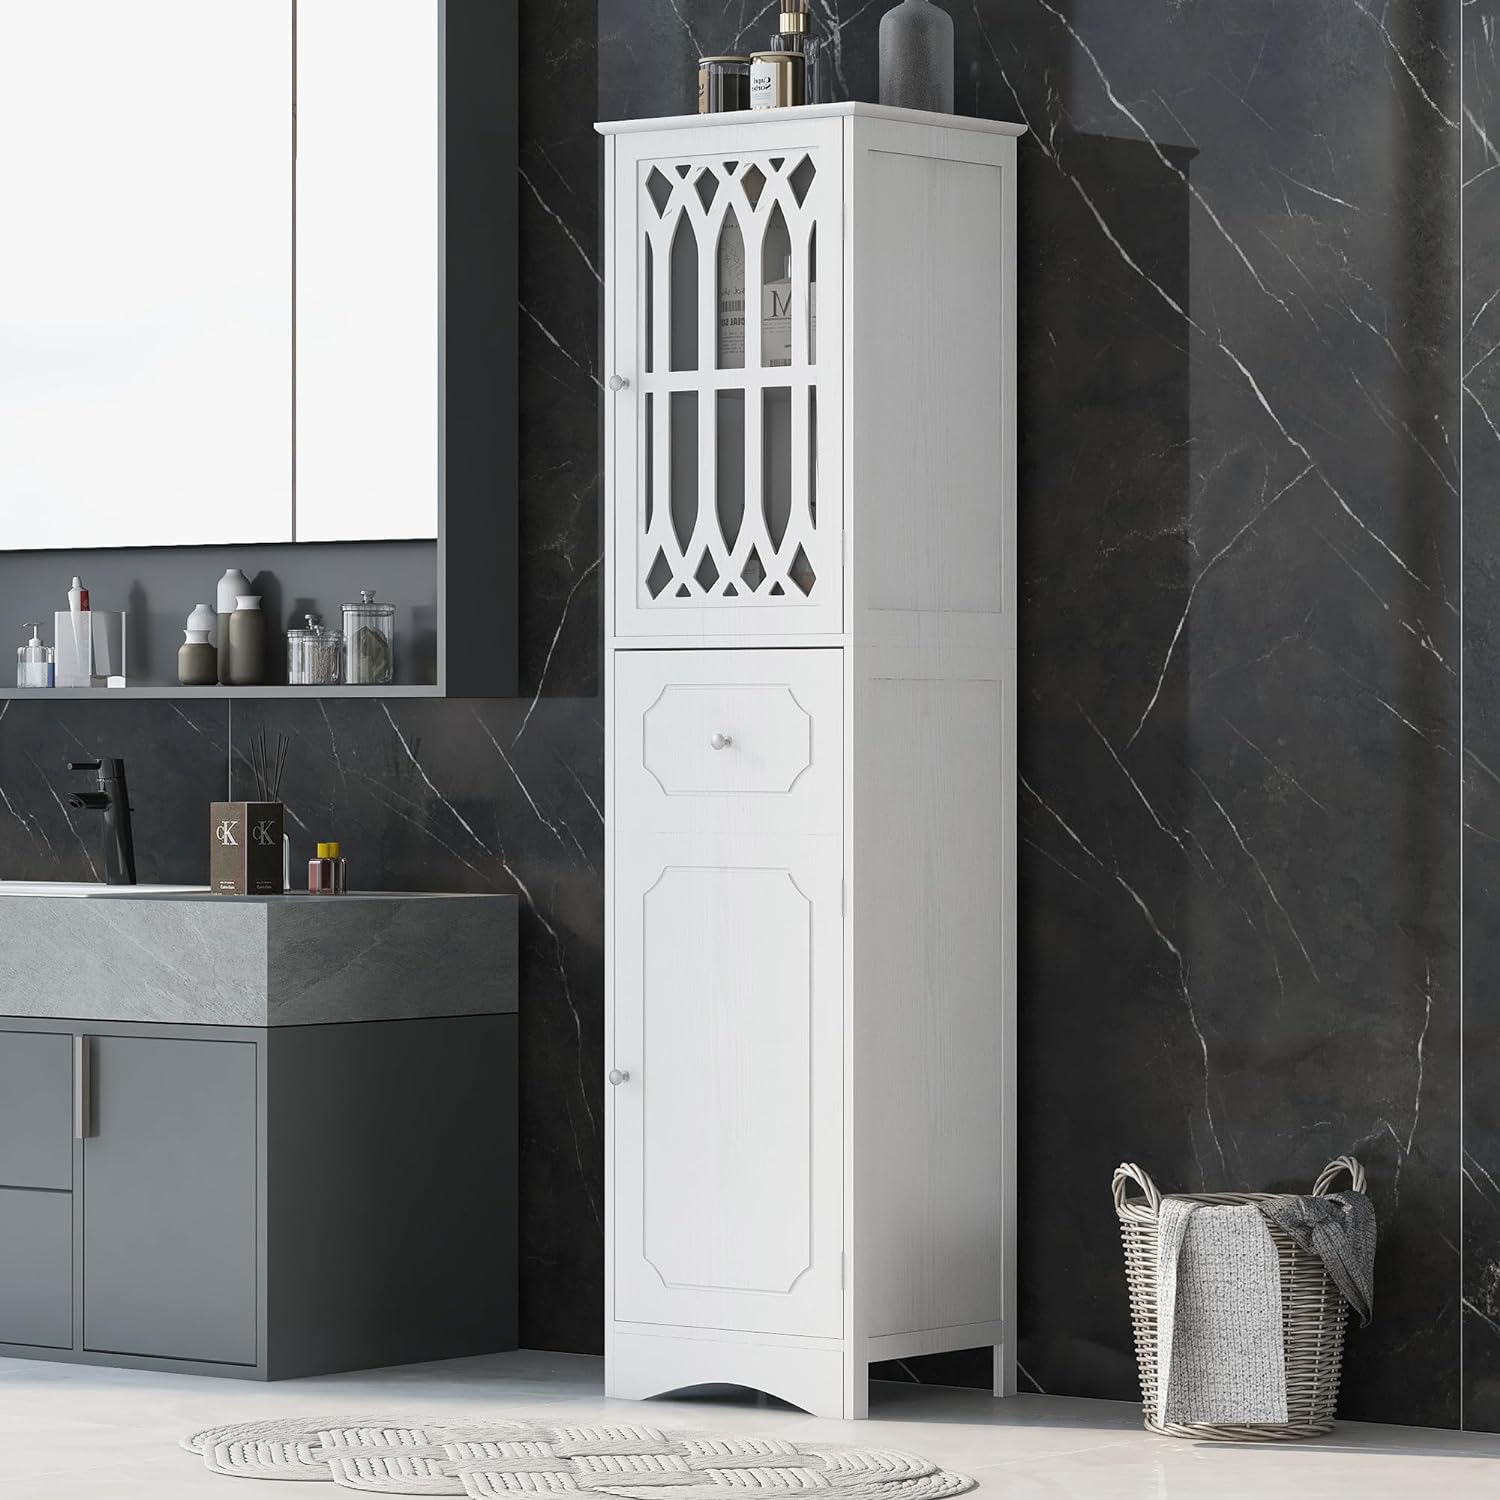 This bathroom storage cabinet is a fantastic addition to our small bathroom, and it' incredibly affordable for the quality. It fits perfectly in our limited space, and we couldn't be happier with it. It' a real value for the price, and it has improved the functionality of our bathroom.